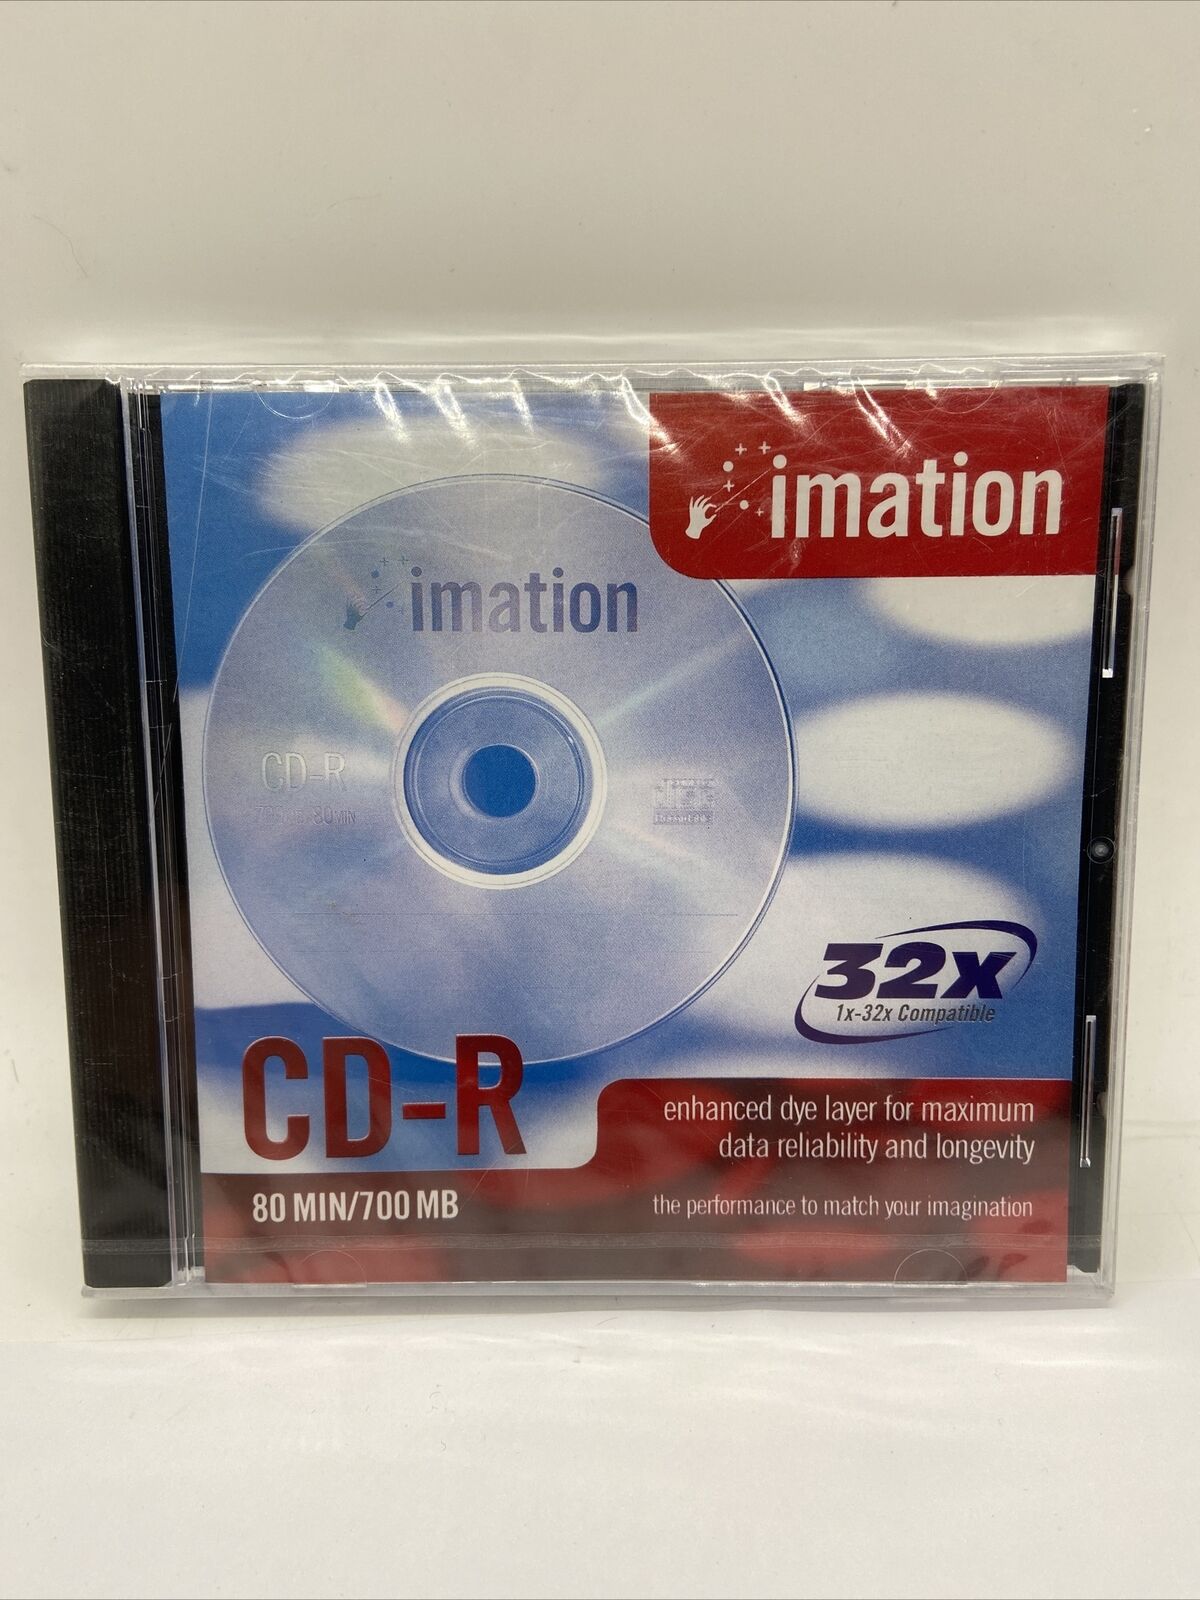 Imation CD-R 1x-32x 700MB 80MIN - NEW & Sealed But Has Light Crack On Case